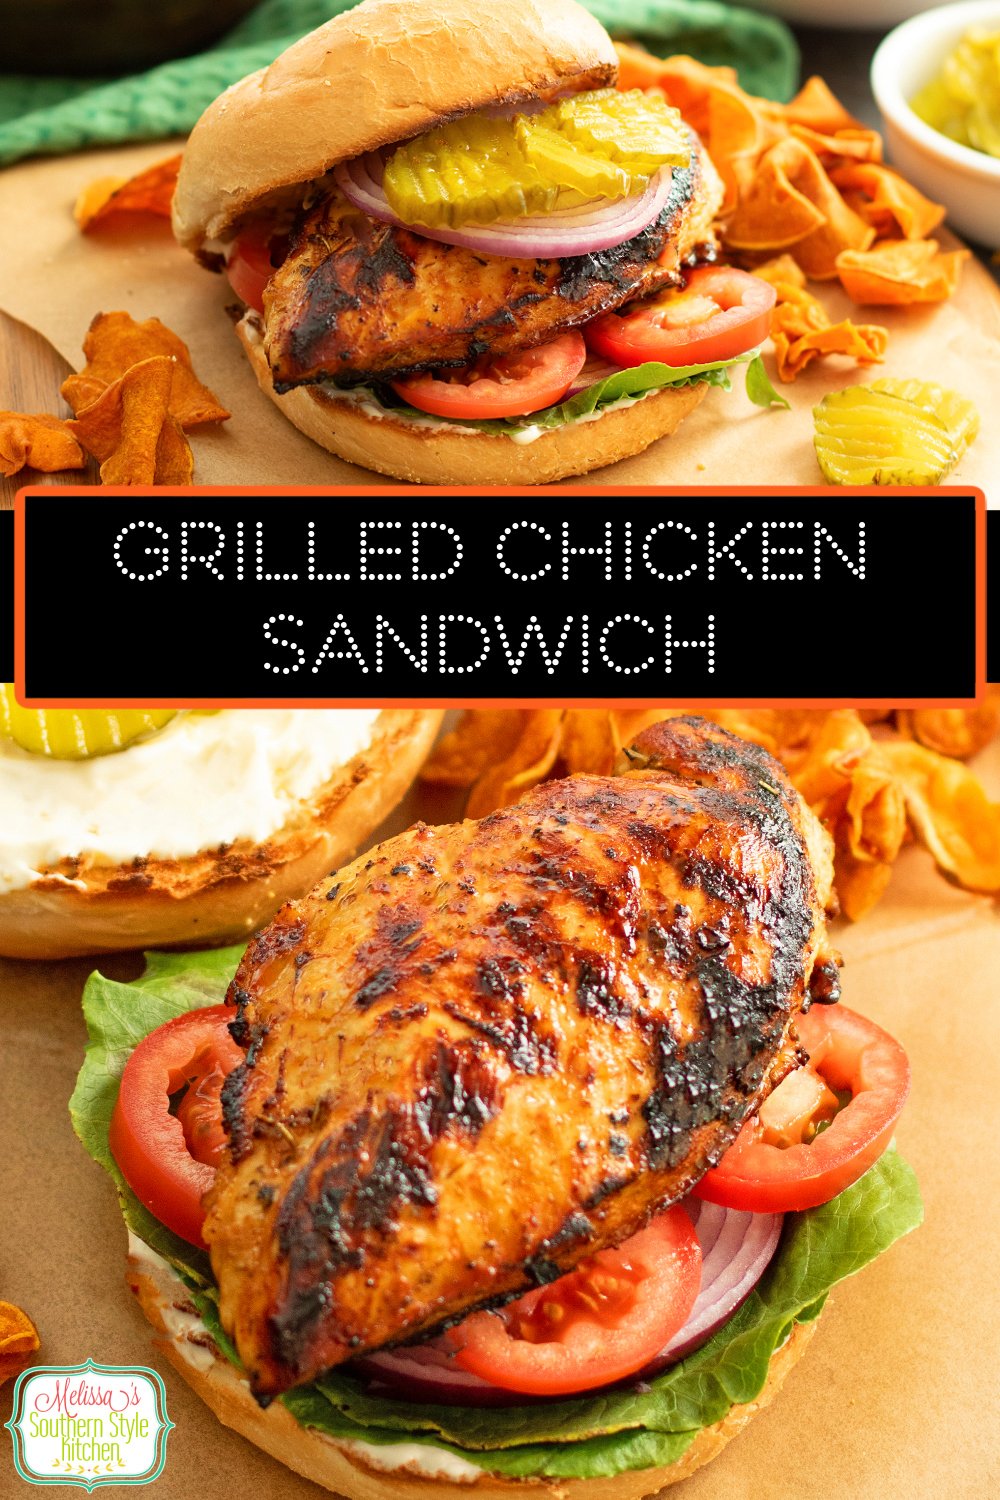 This flavorful Grilled Chicken Sandwich features a homemade marinade that packs a pop of flavor. #grilledchicken #easychickenrecipes #chickenbreastrecipes #chickensandwich #howtomakechicken #easychickenrecipes via @melissasssk